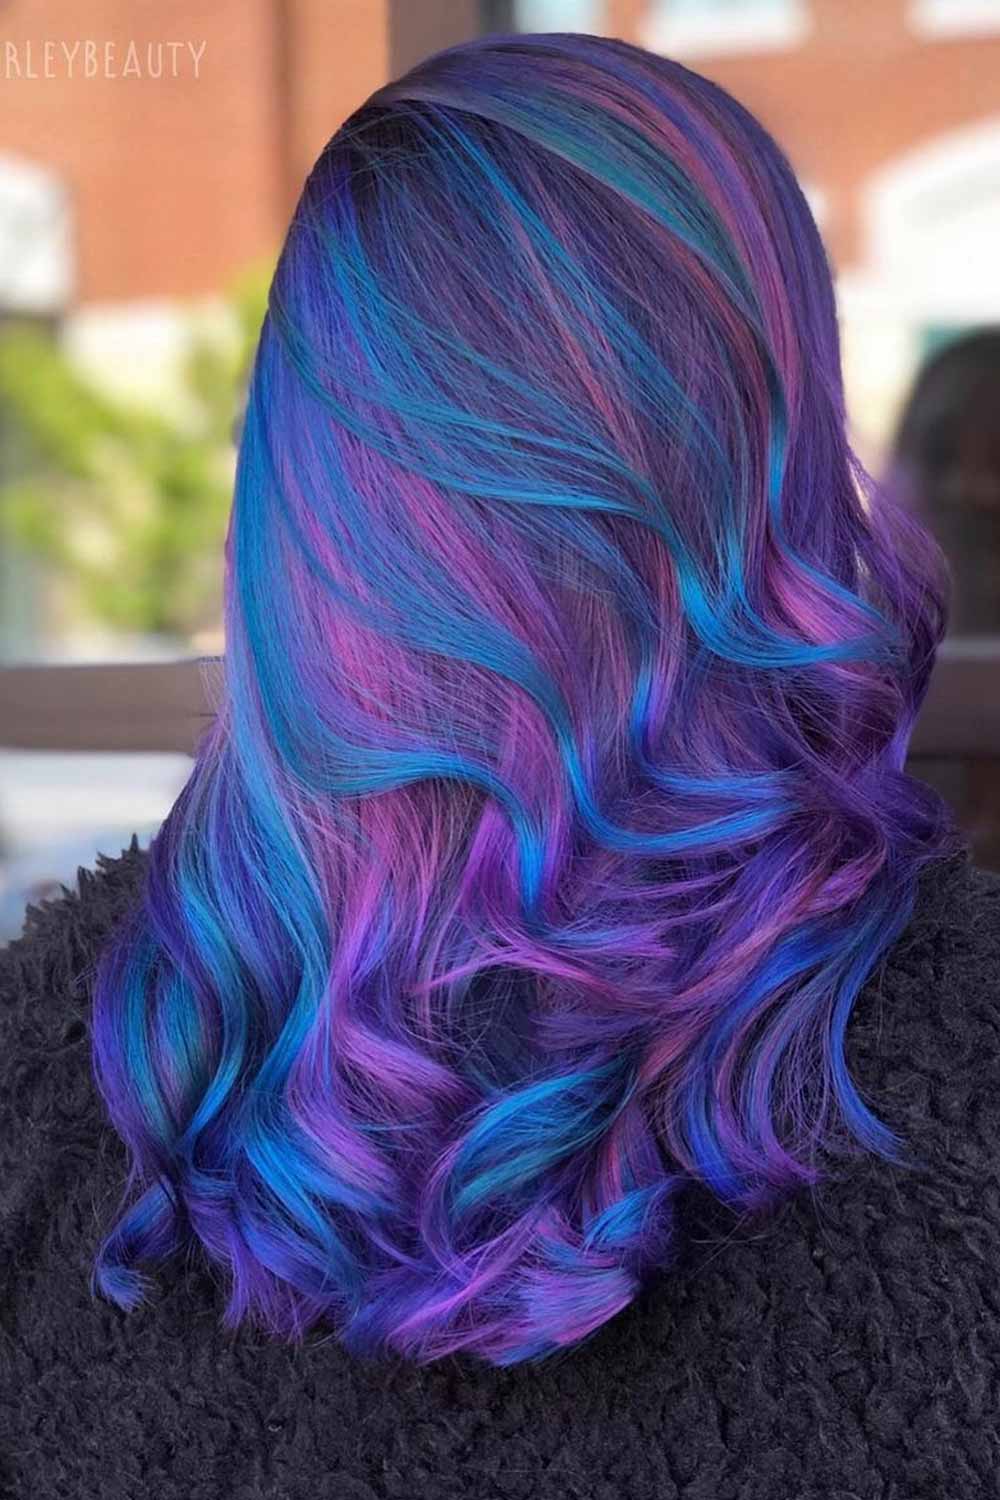 Tips for Keeping Your Blue and Purple Hair Looking Fresh and Vibrant